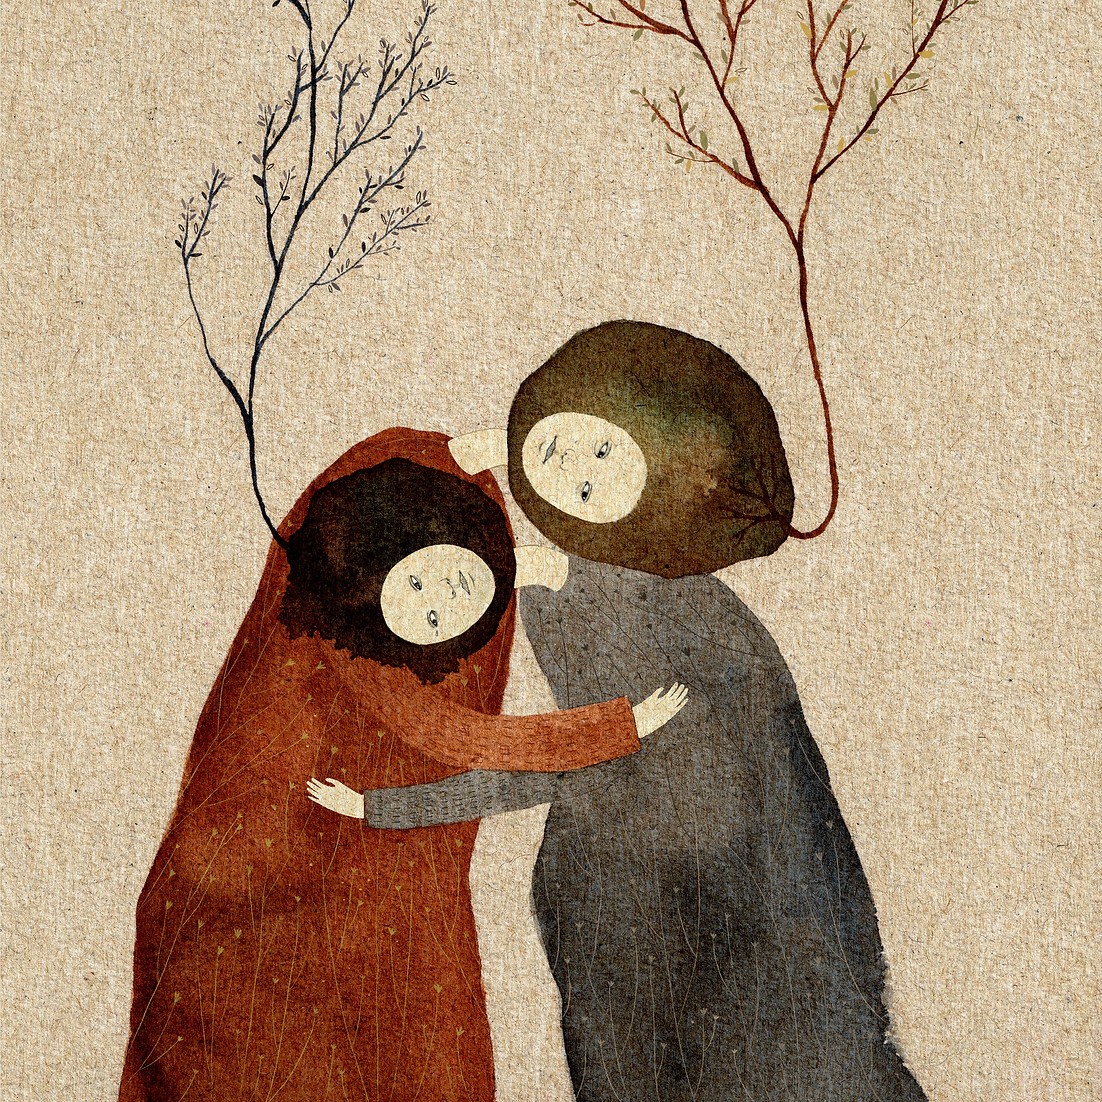 Illustration by Edwina Kung. Two figures embrace. Seedlings grow from their heads.